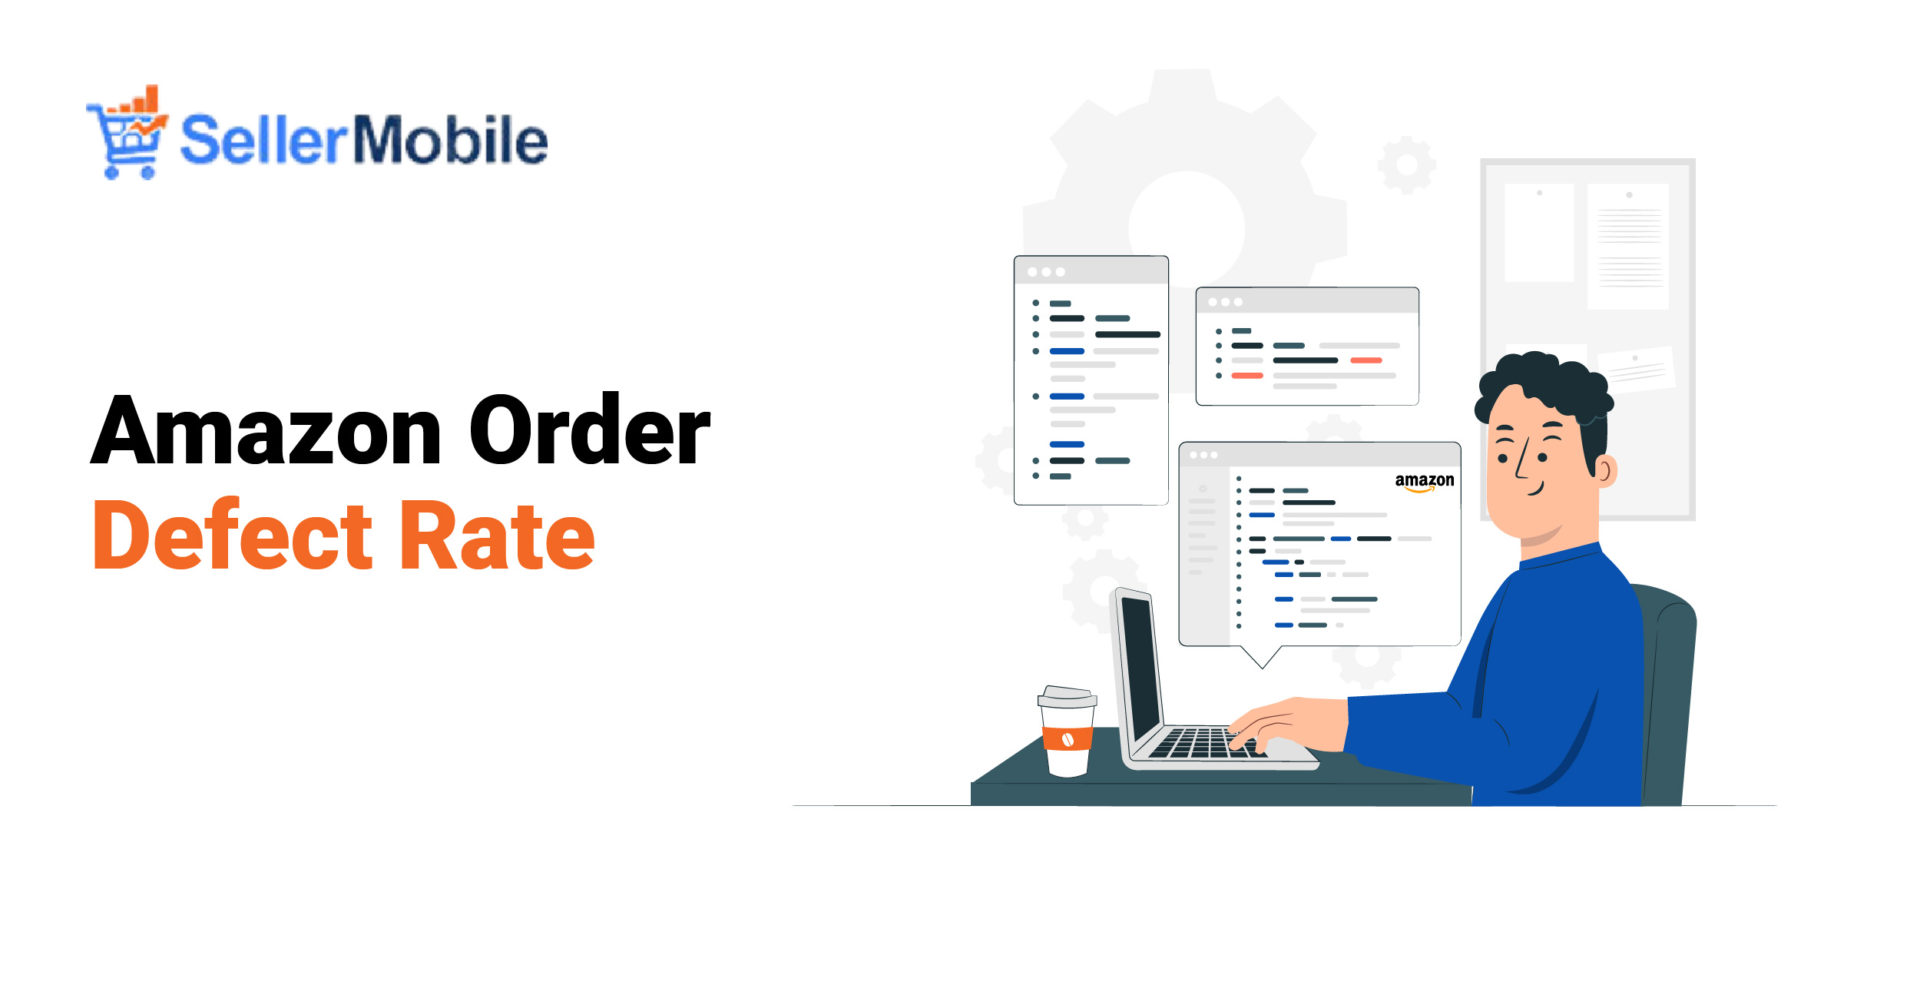 How to Improve Amazon Order Defect Rate? 4 Tactics That Work